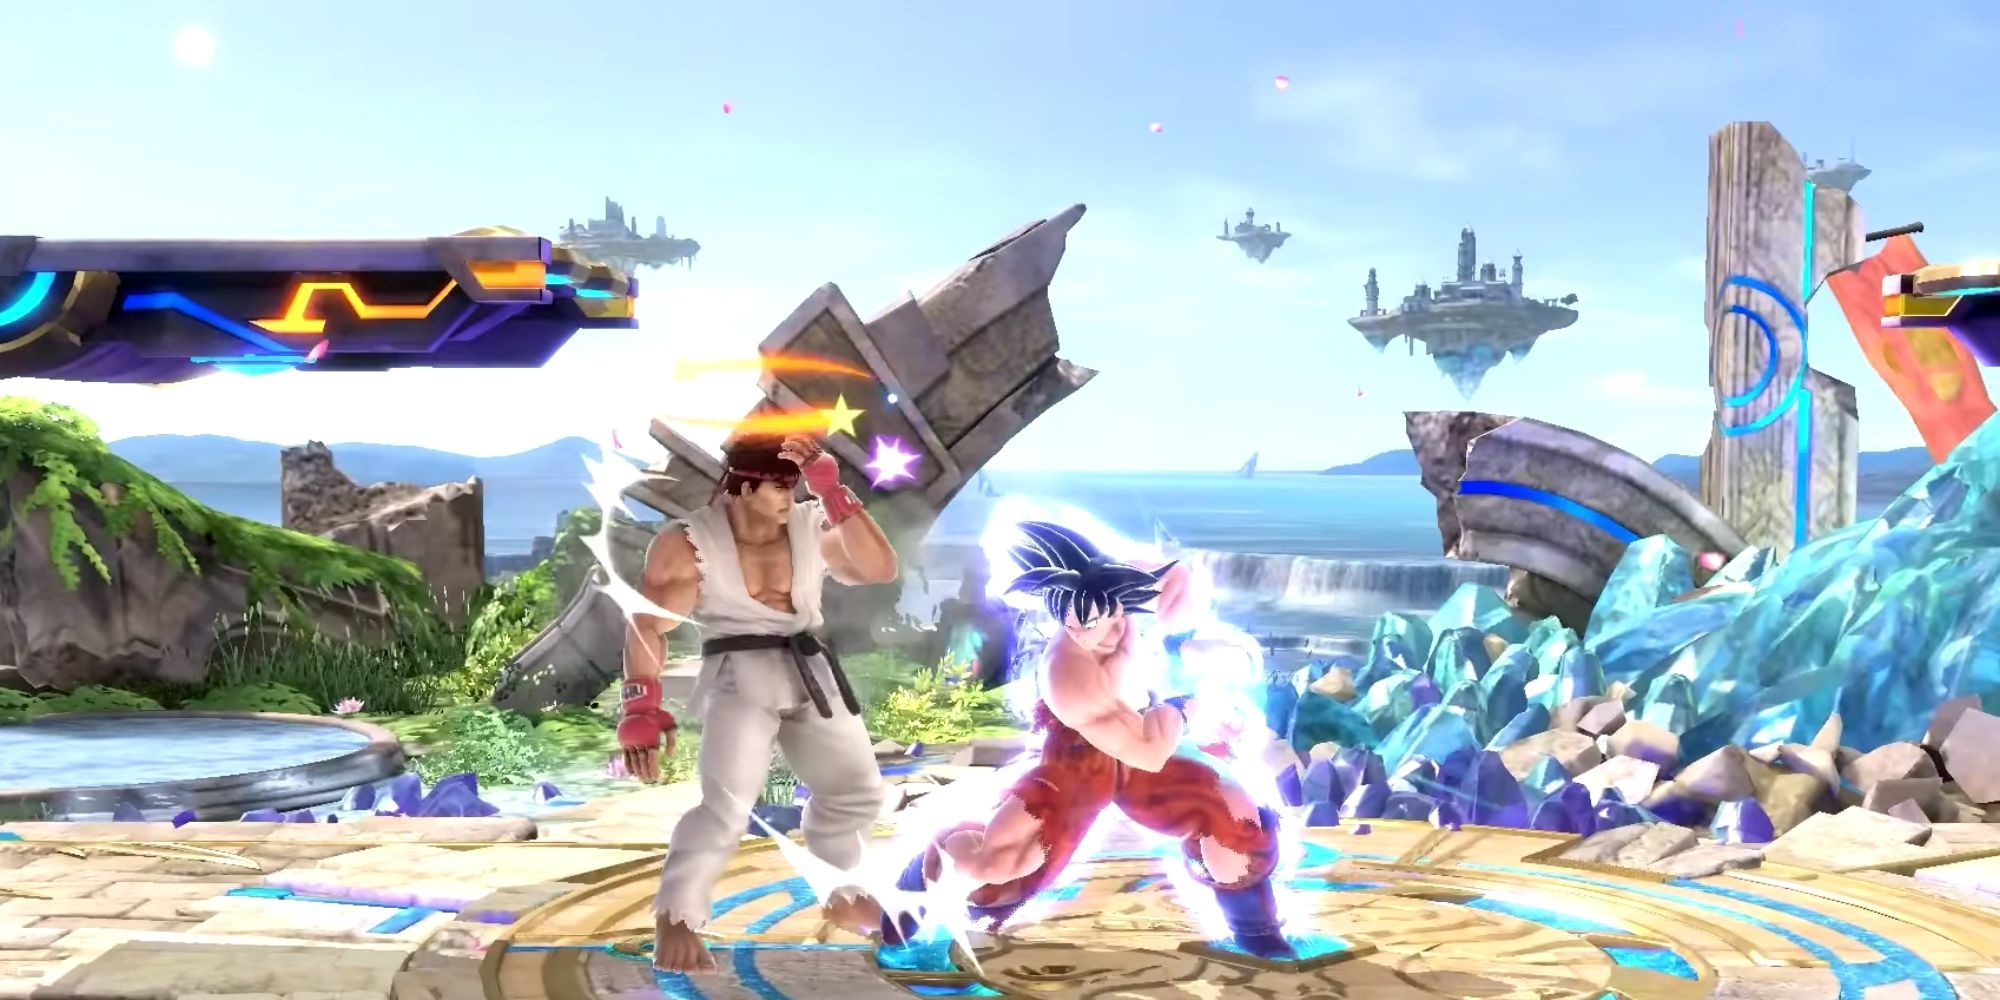 A mod for Super Smash Bros. Ultimate by mastaklo that adds Goku to the game with a unique moveset.